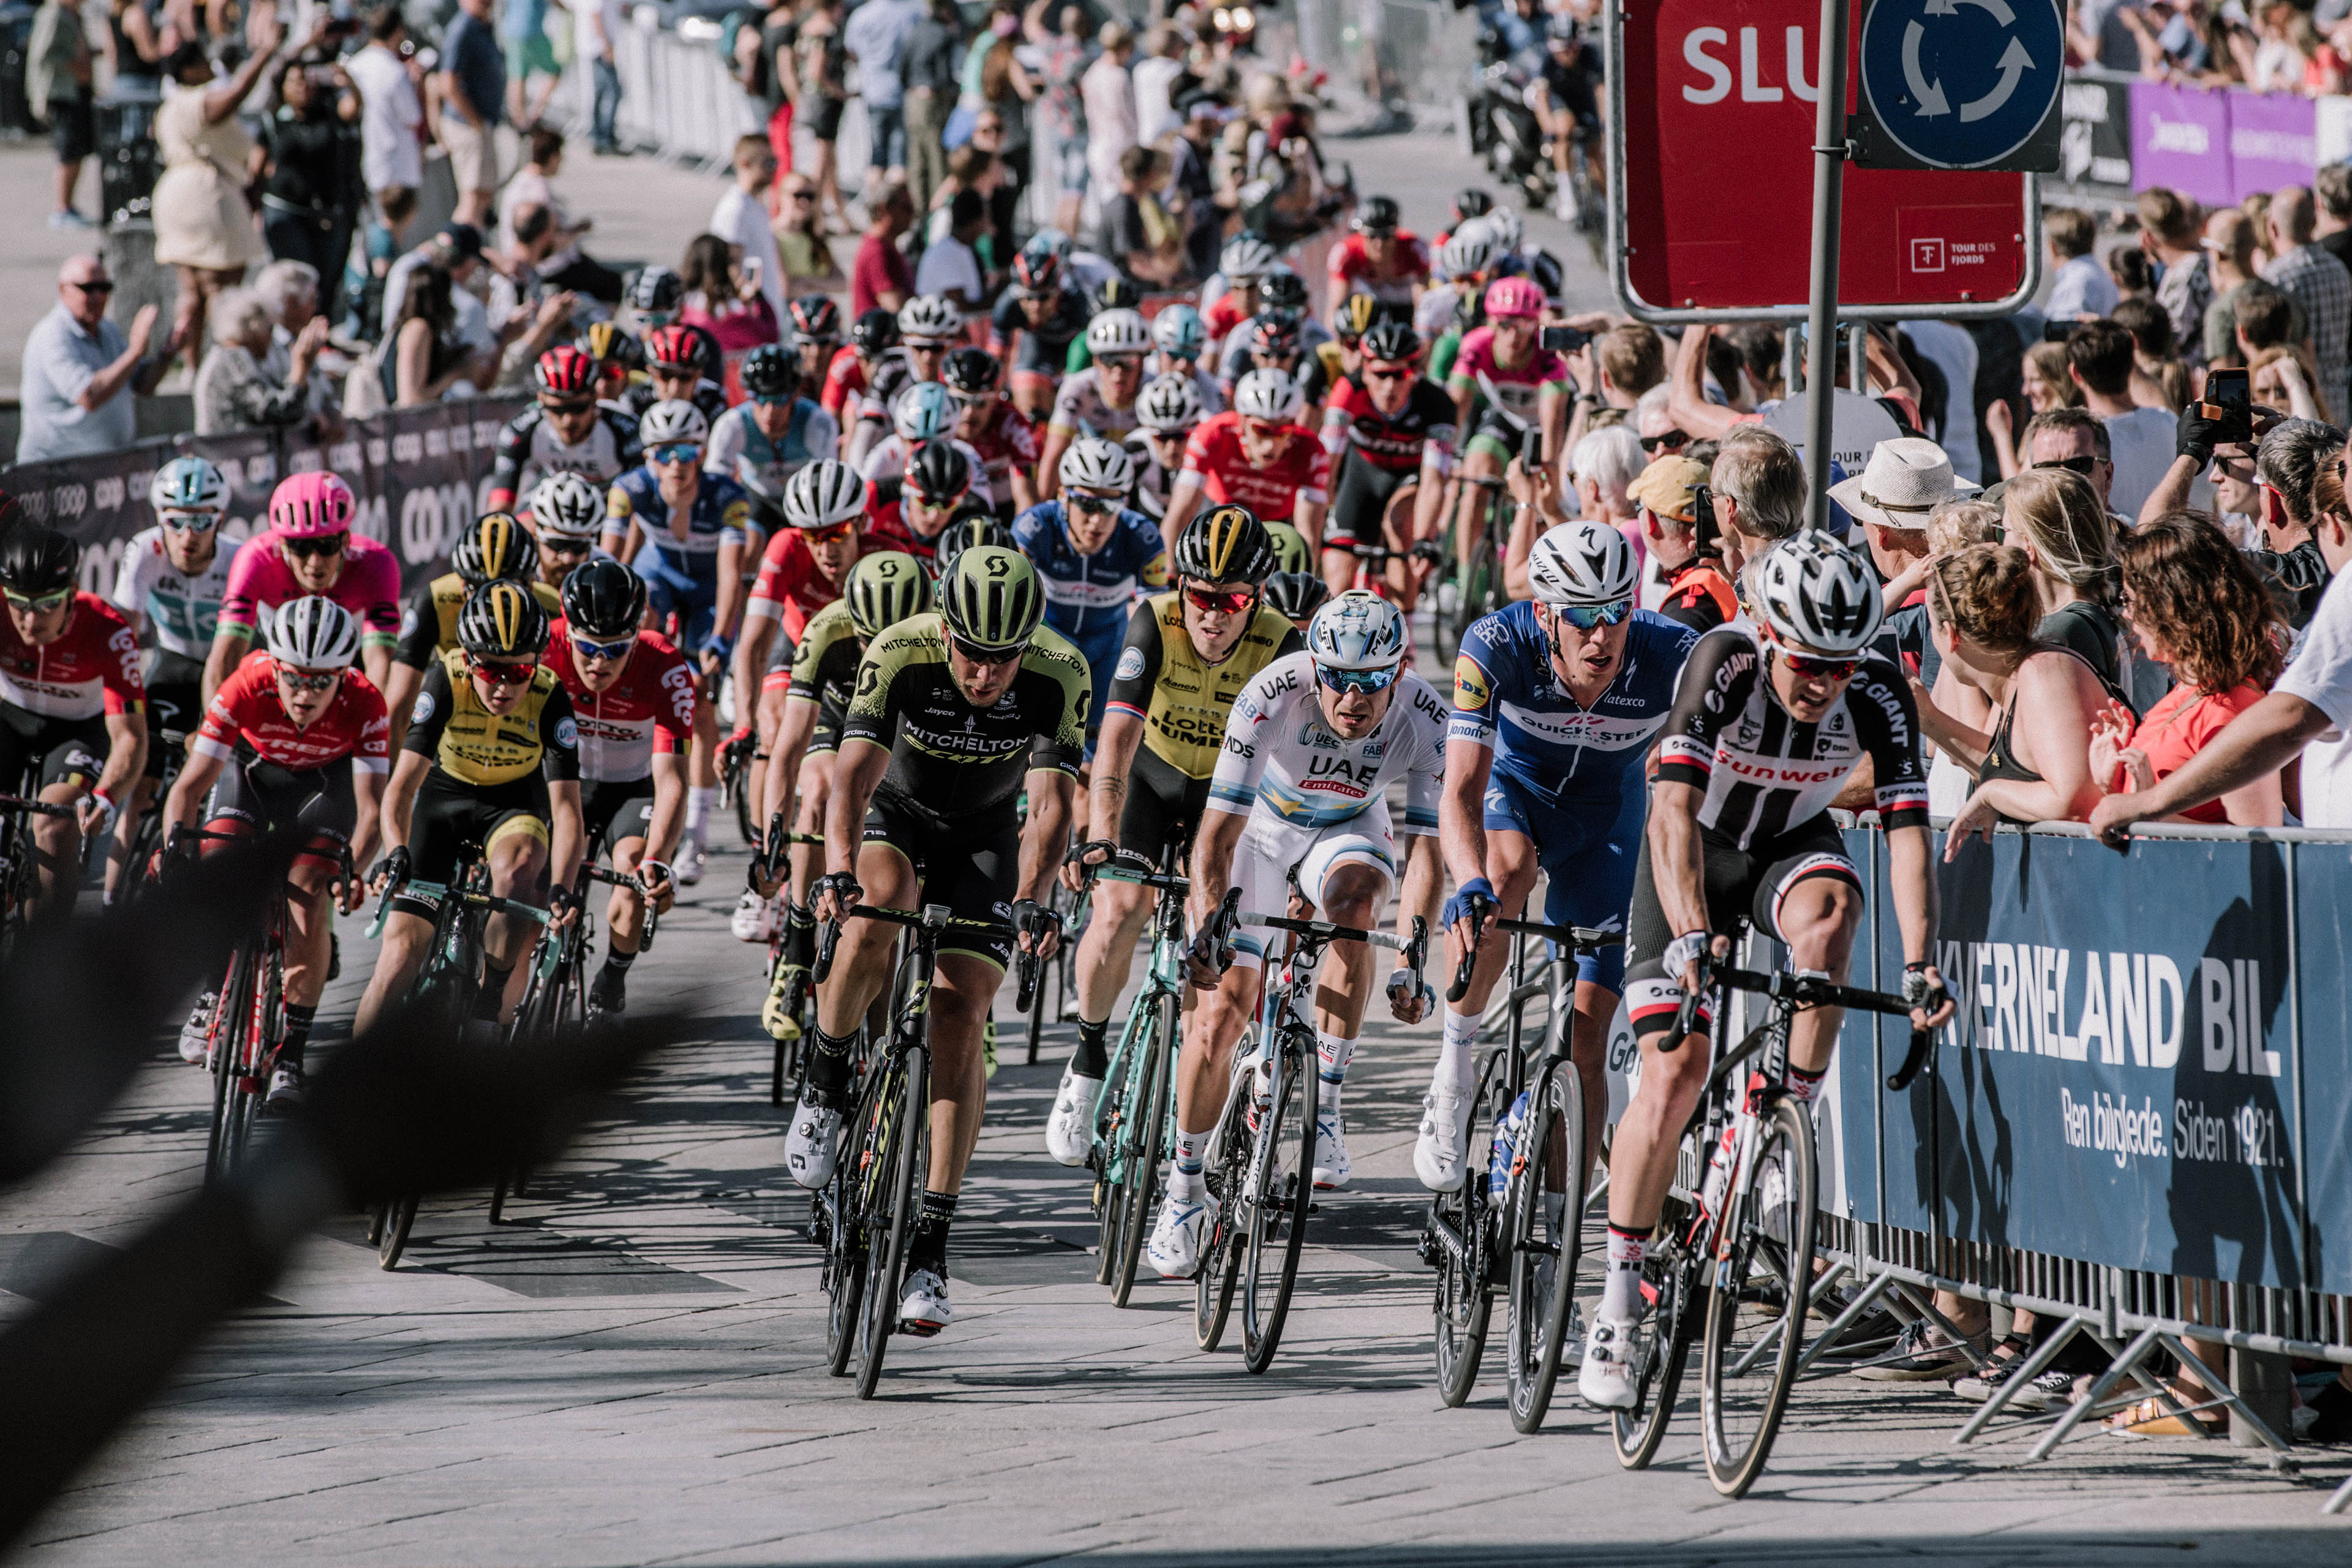 How can you turn spectators into fans?. The sport of cycling has a money problem. Can the sport create a platform that can effectively engage and monetize global viewership?